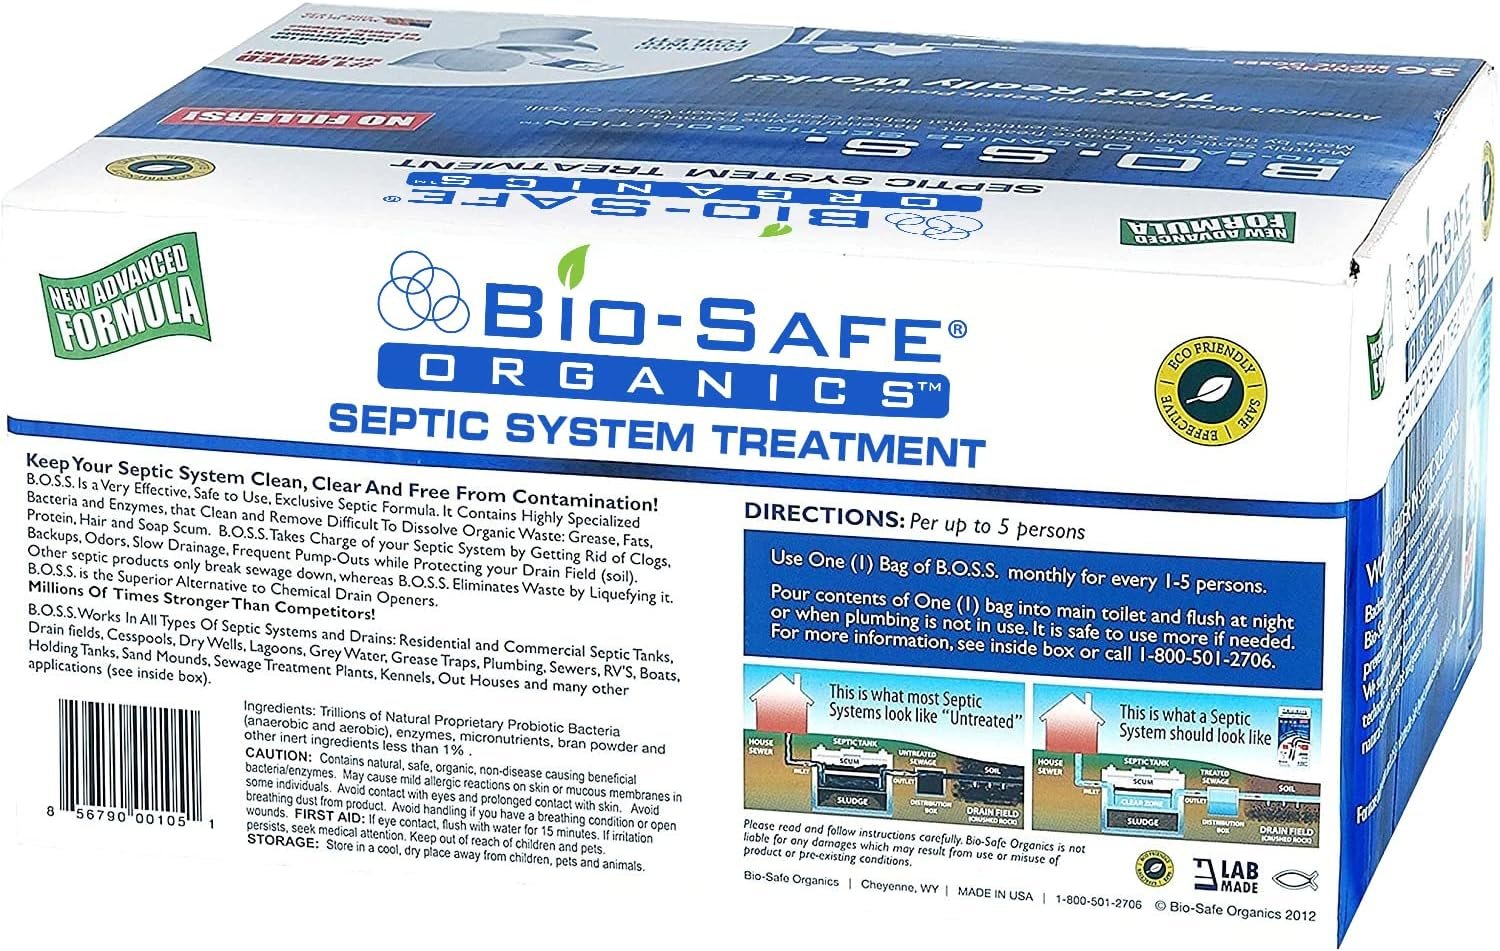 B.O.S.S. Bio-Safe Organics Septic Tank Treatment 36 Month Supply 2.5 oz Bags - Patented Bact Enzyme Exxon Valdez Septic System Monthly Maintenance Formula - Treats All Septic Systems 100% Guaranteed